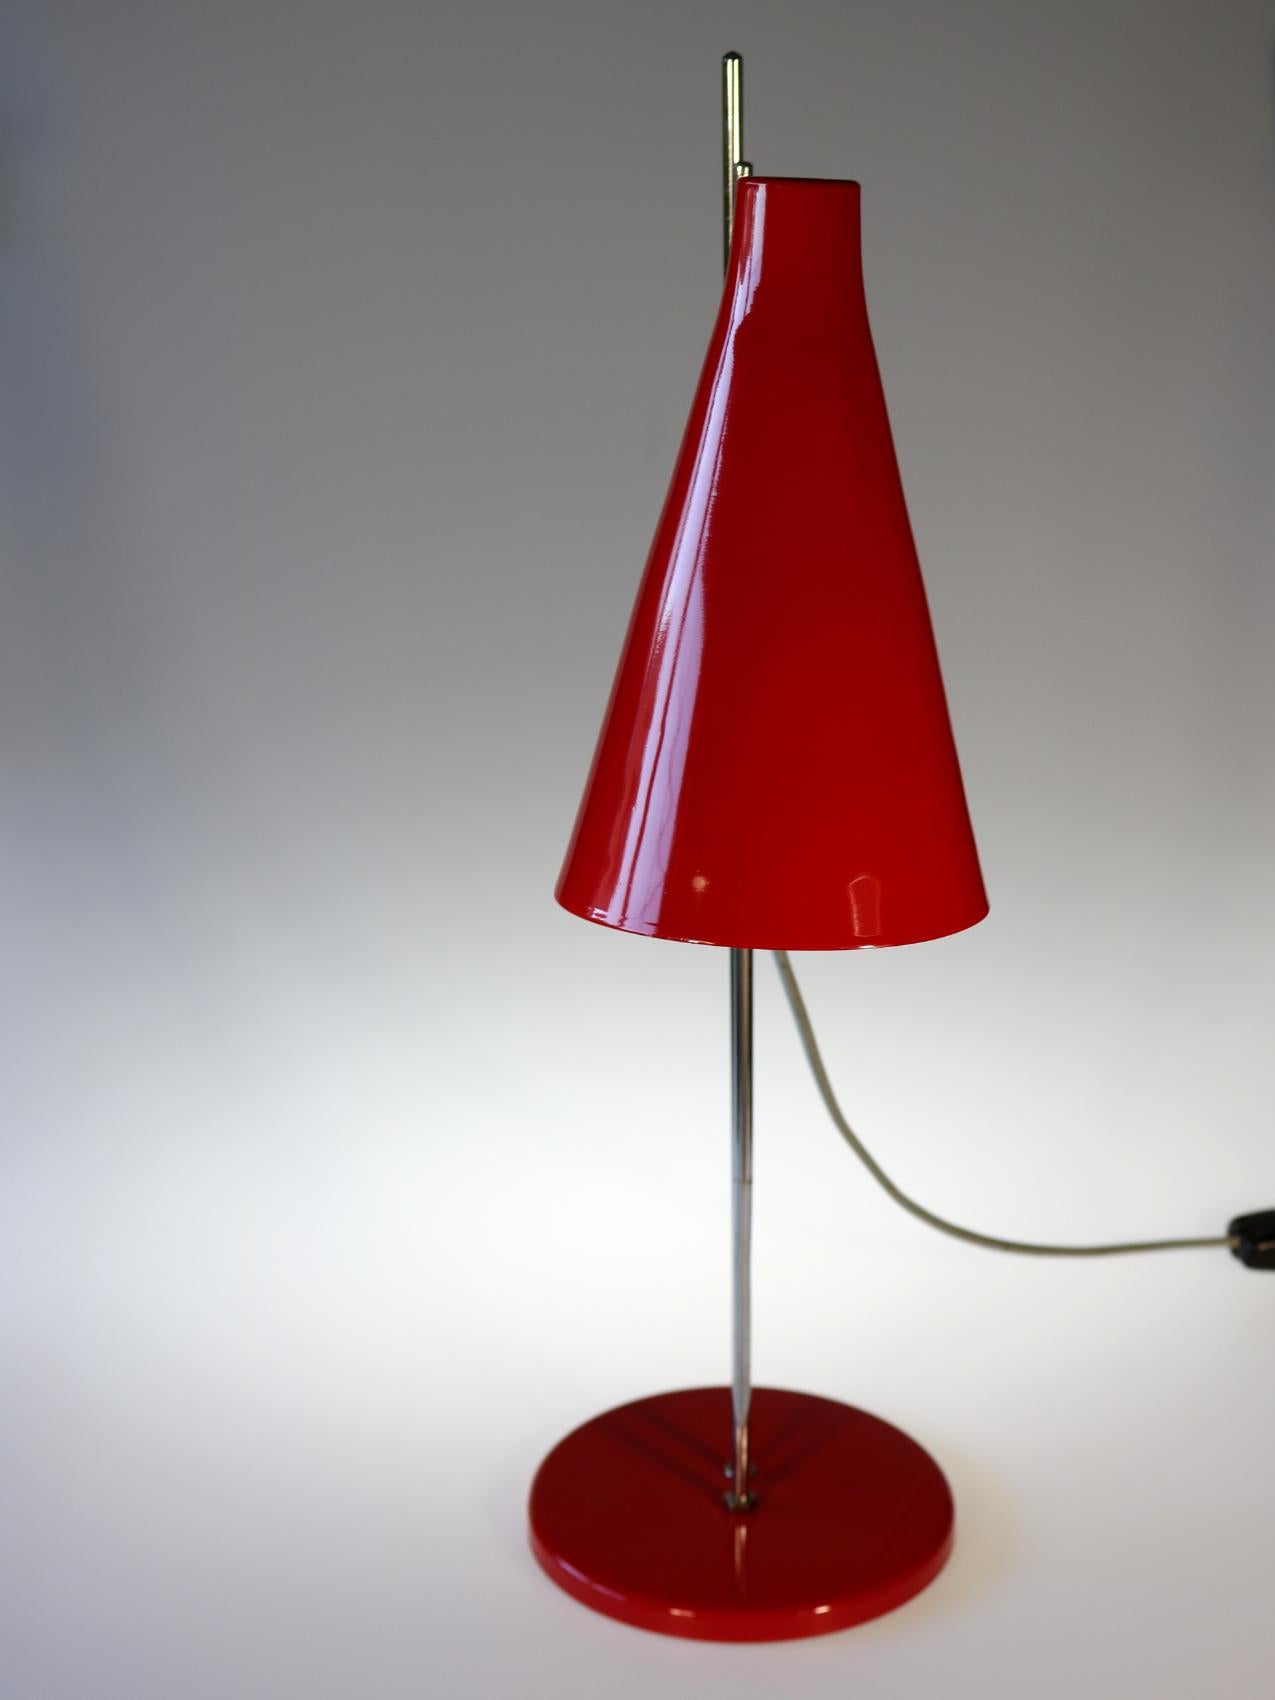 Midcentury table lamp designed by Josef Hurka for Lidokov. Chrome-plated construction in good condition, lampshade adjustable to the sides and up and down. Lampshade material aluminum.